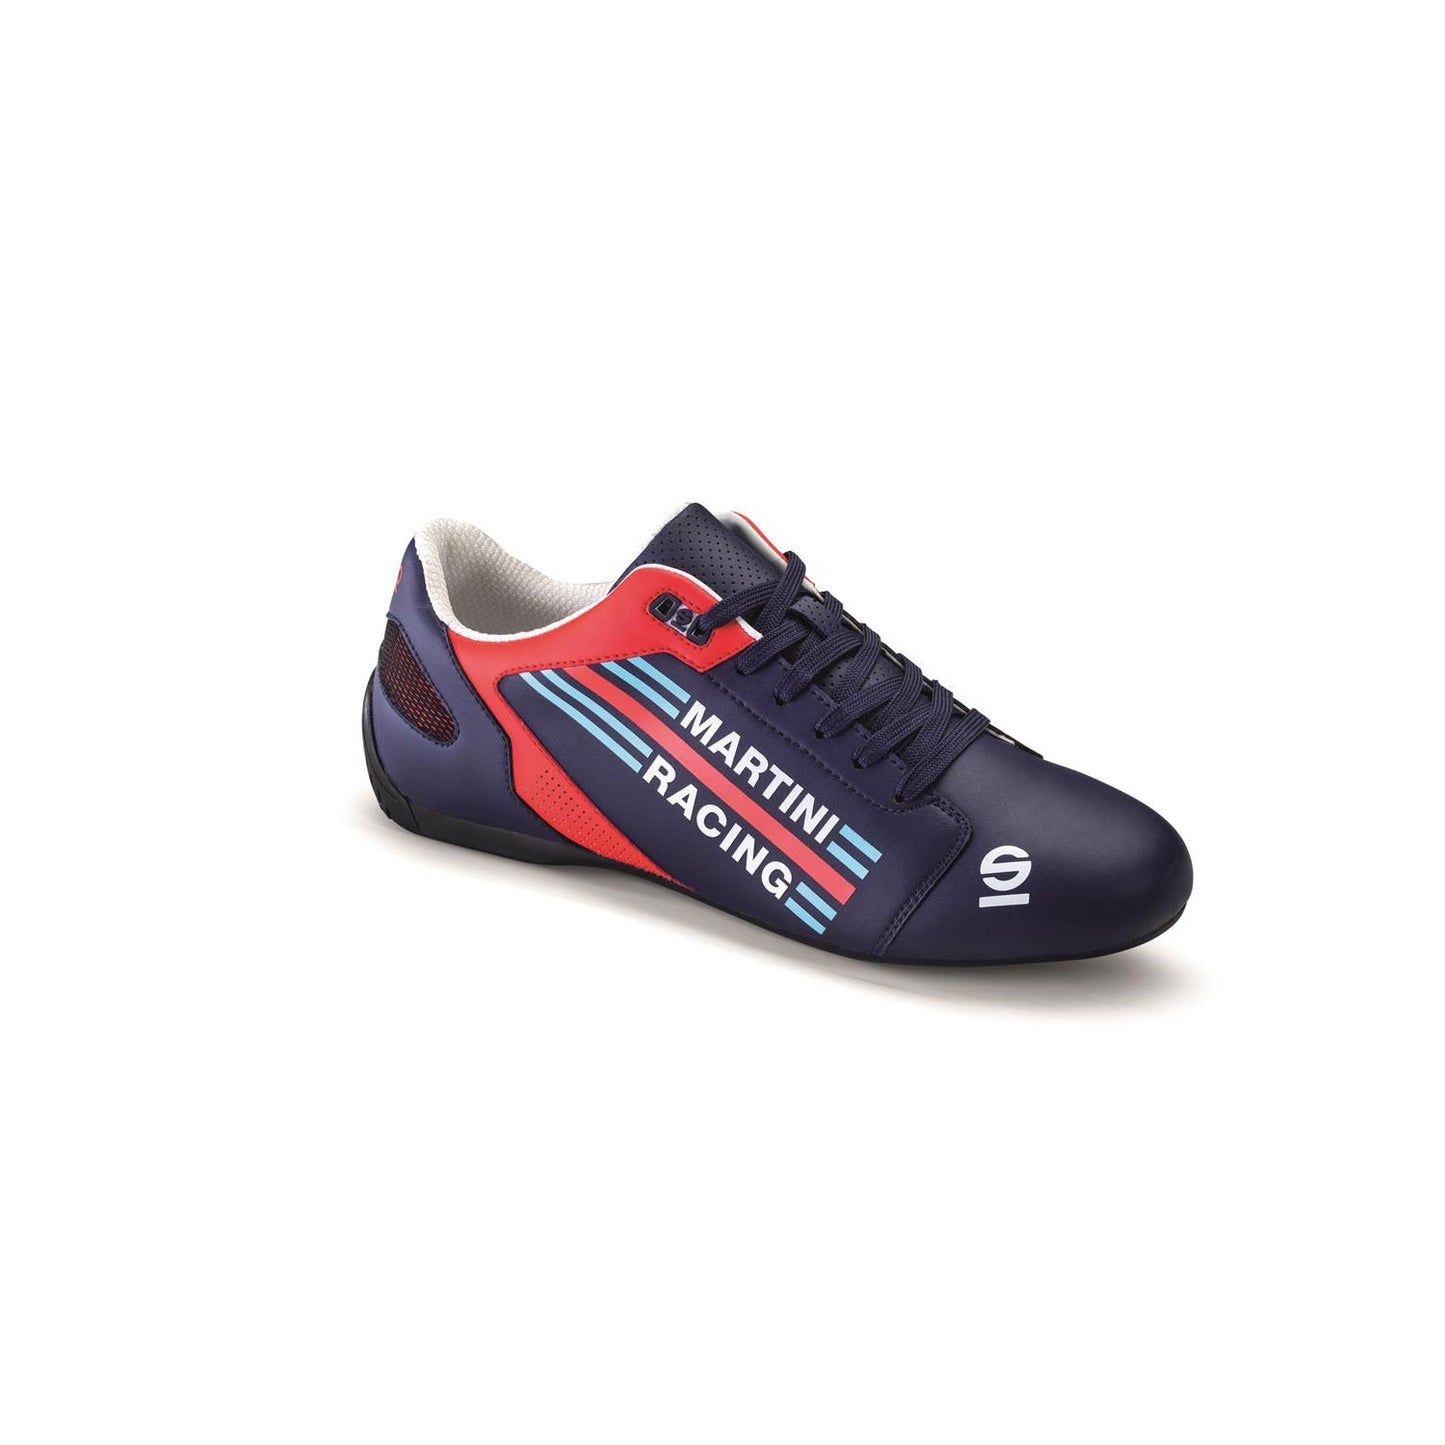 Sparco SL-17 Martini Racing Shoes